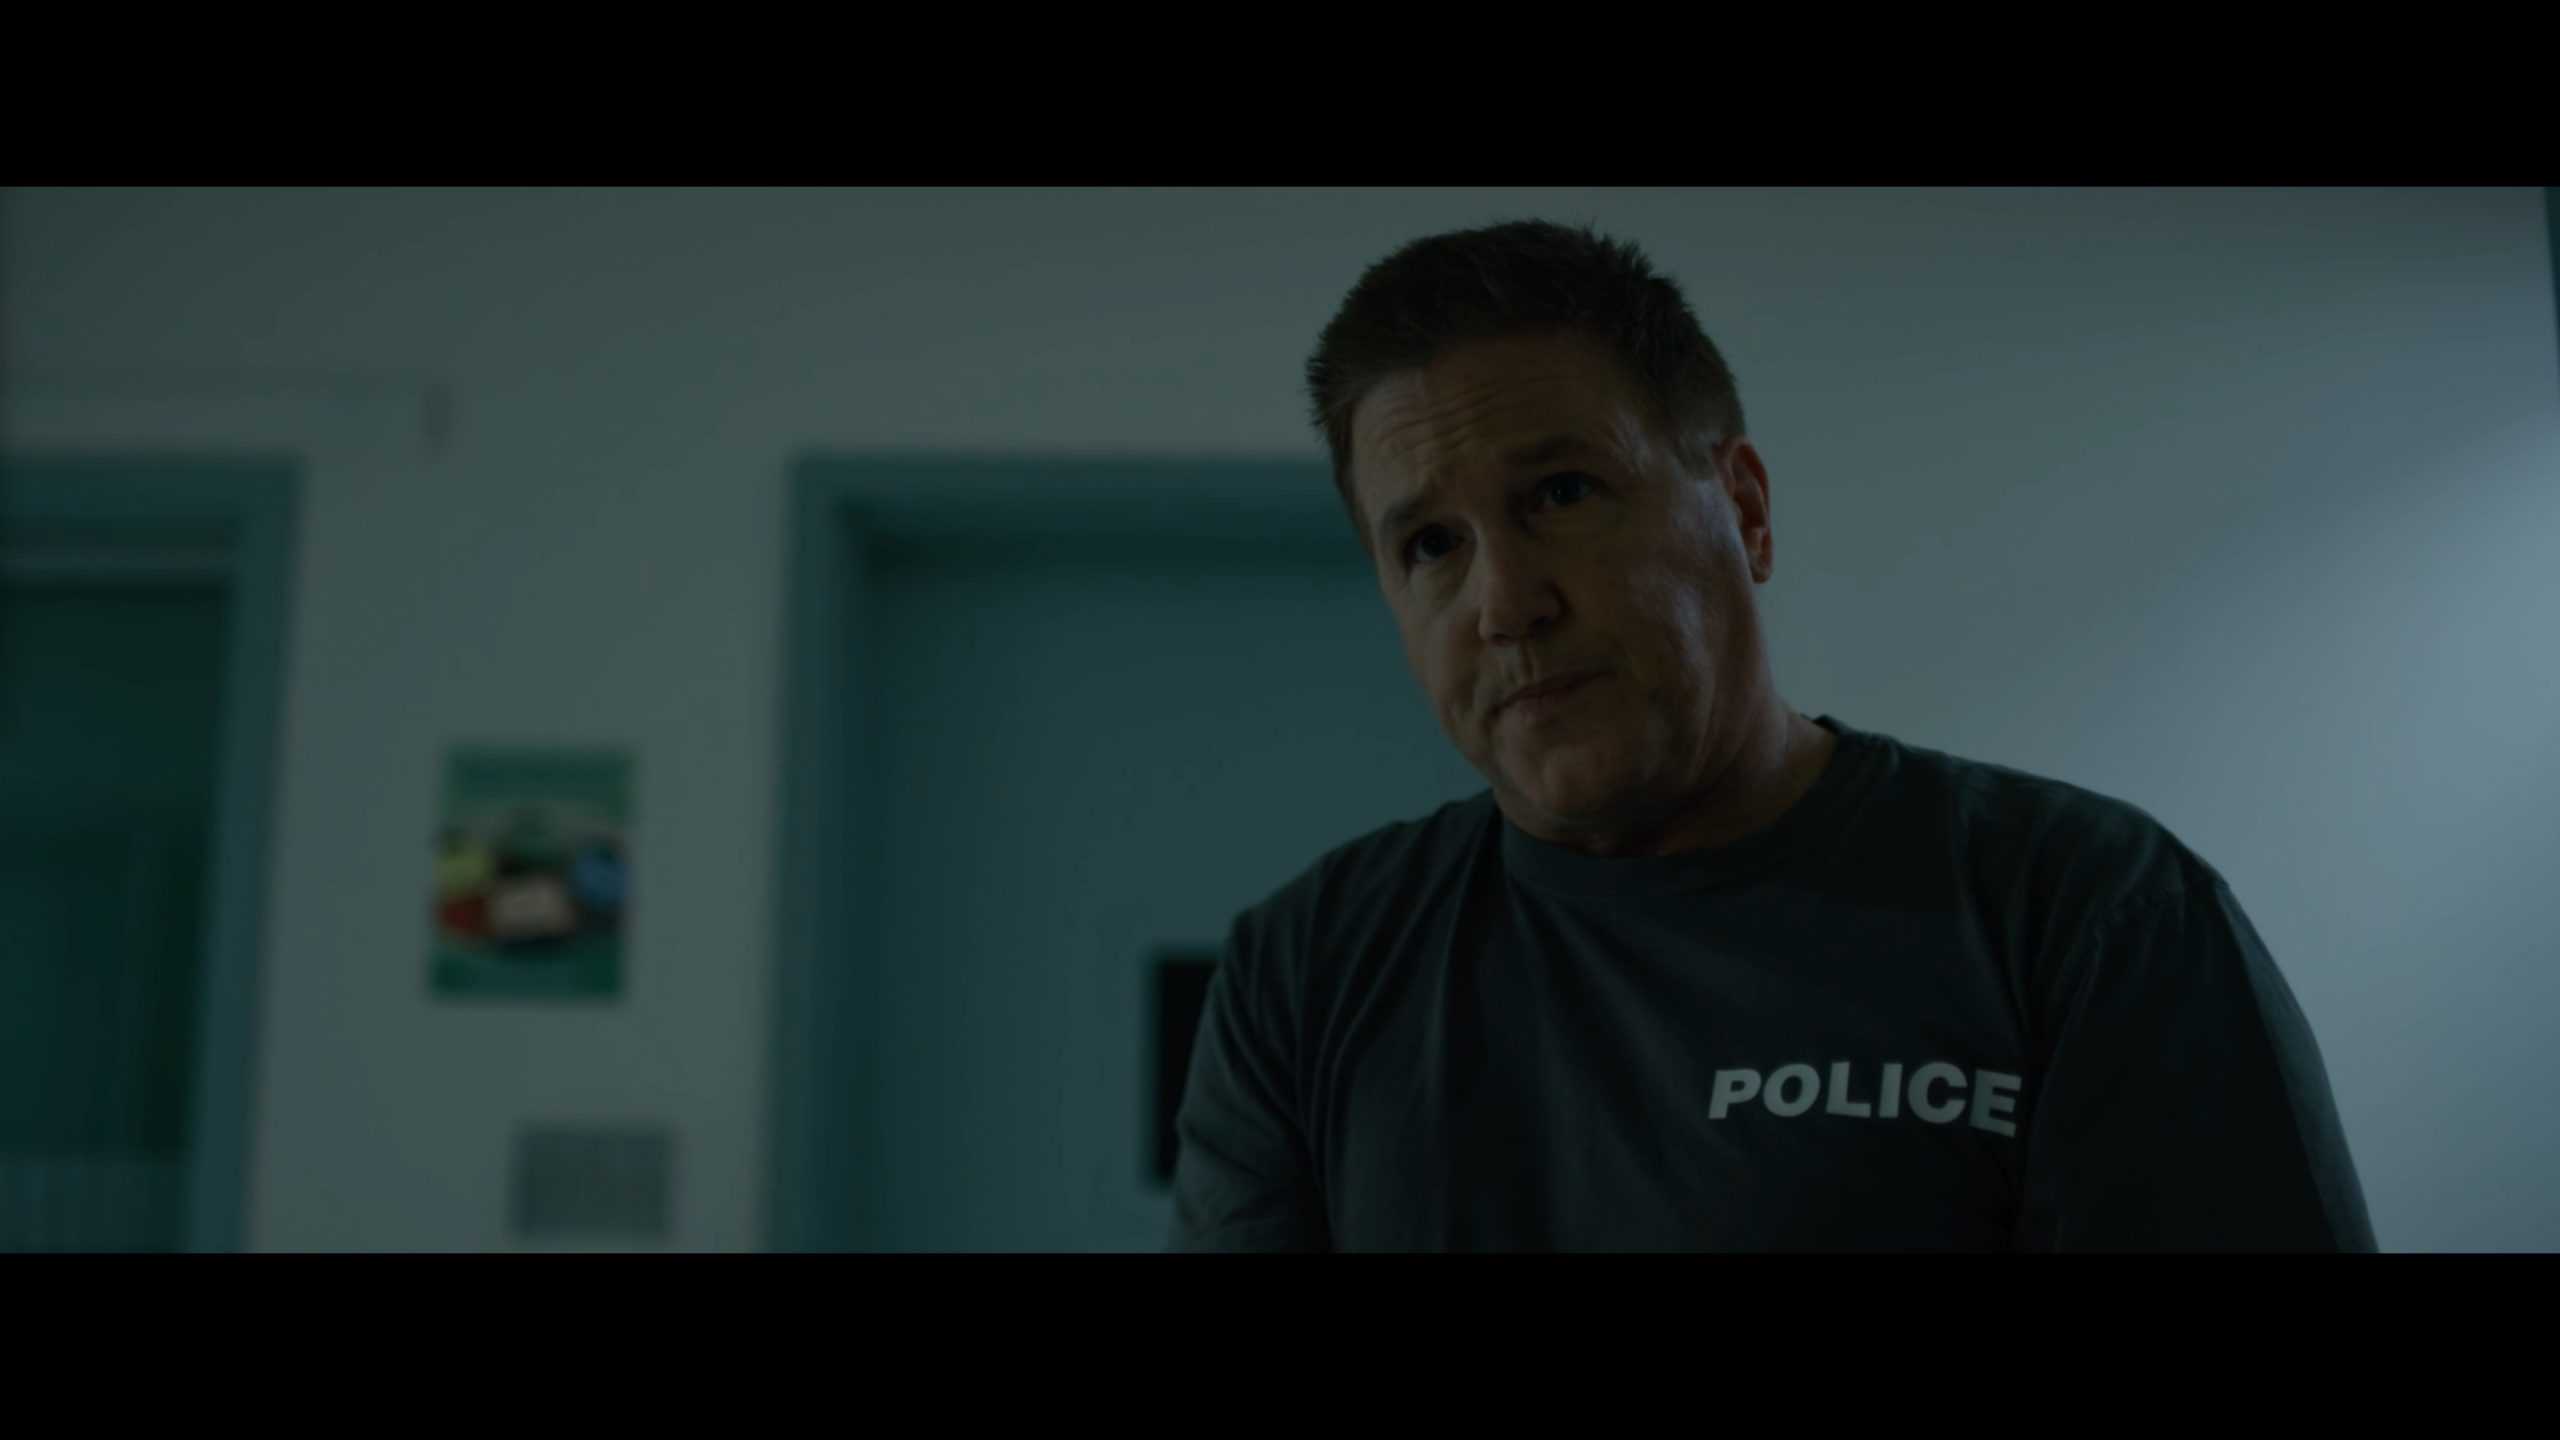 Lochlyn Munro as Frank trying to get out of limbo